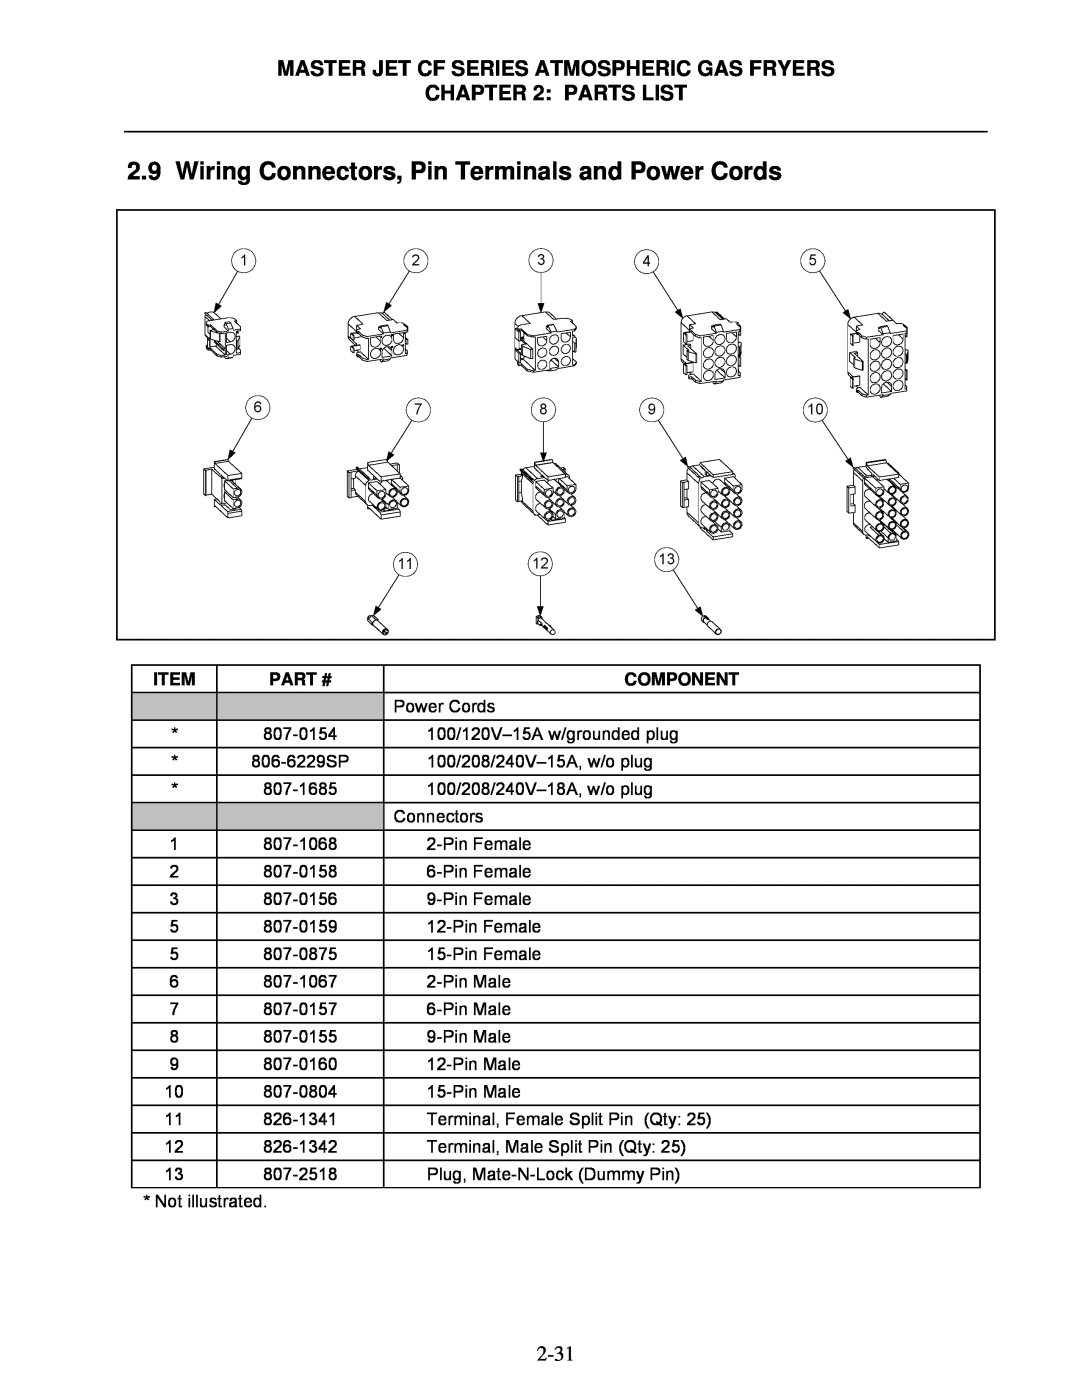 Frymaster MJCF Wiring Connectors, Pin Terminals and Power Cords, Master Jet Cf Series Atmospheric Gas Fryers Parts List 